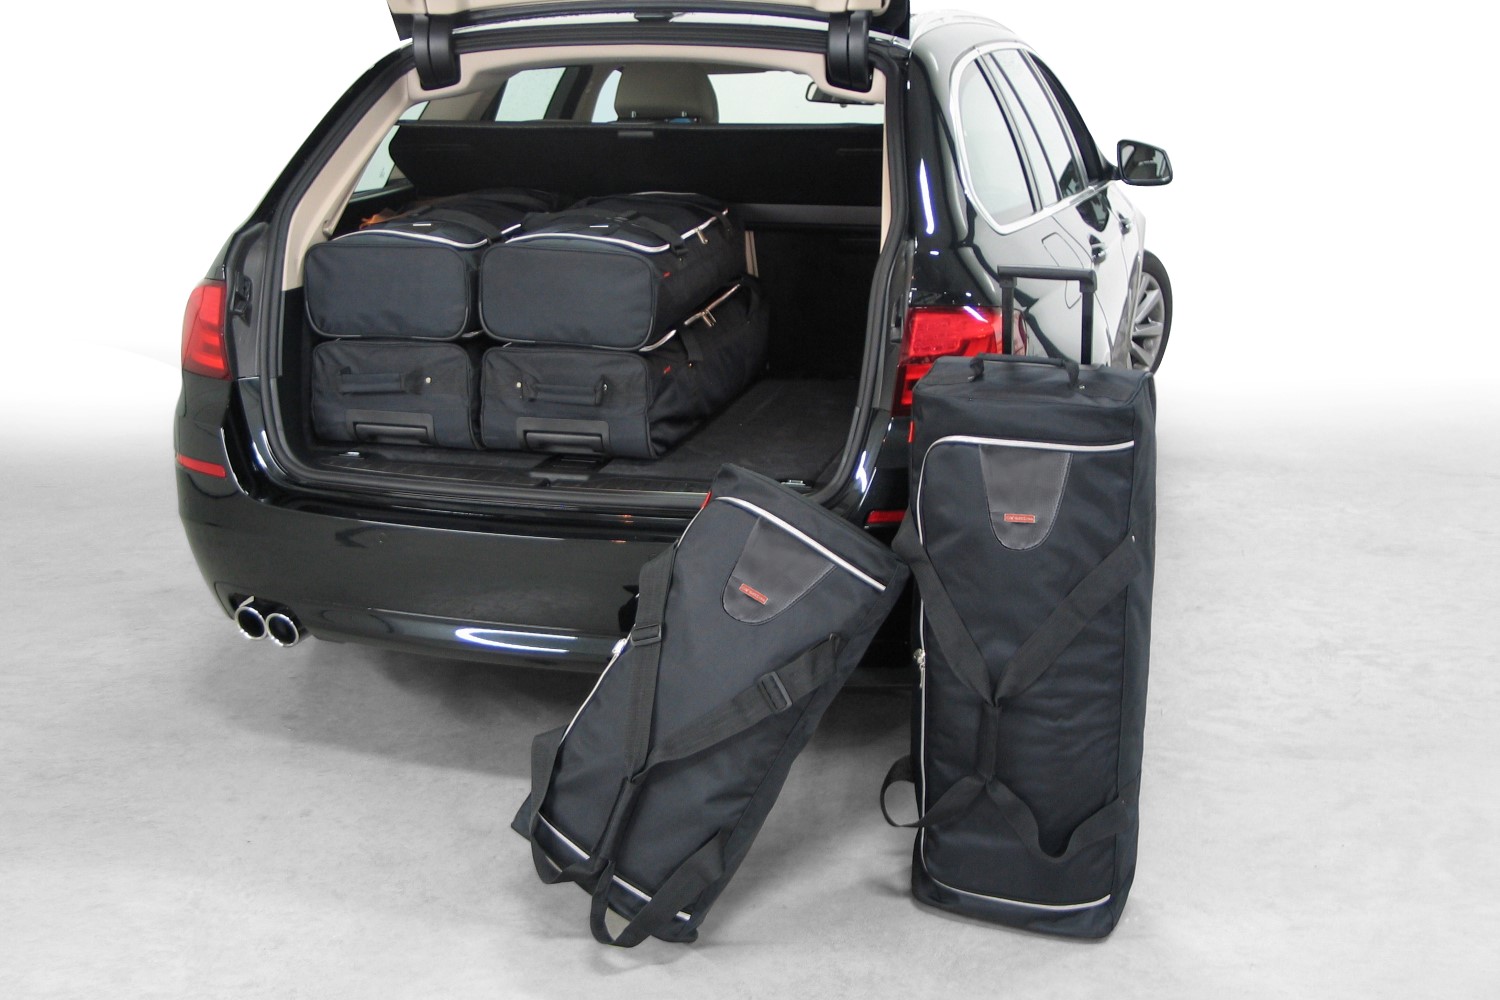 https://www.car-bags.com/images/stories/virtuemart/product/b10201s-bmw-5-serie-touring-f11-11-car-bags-1.jpg